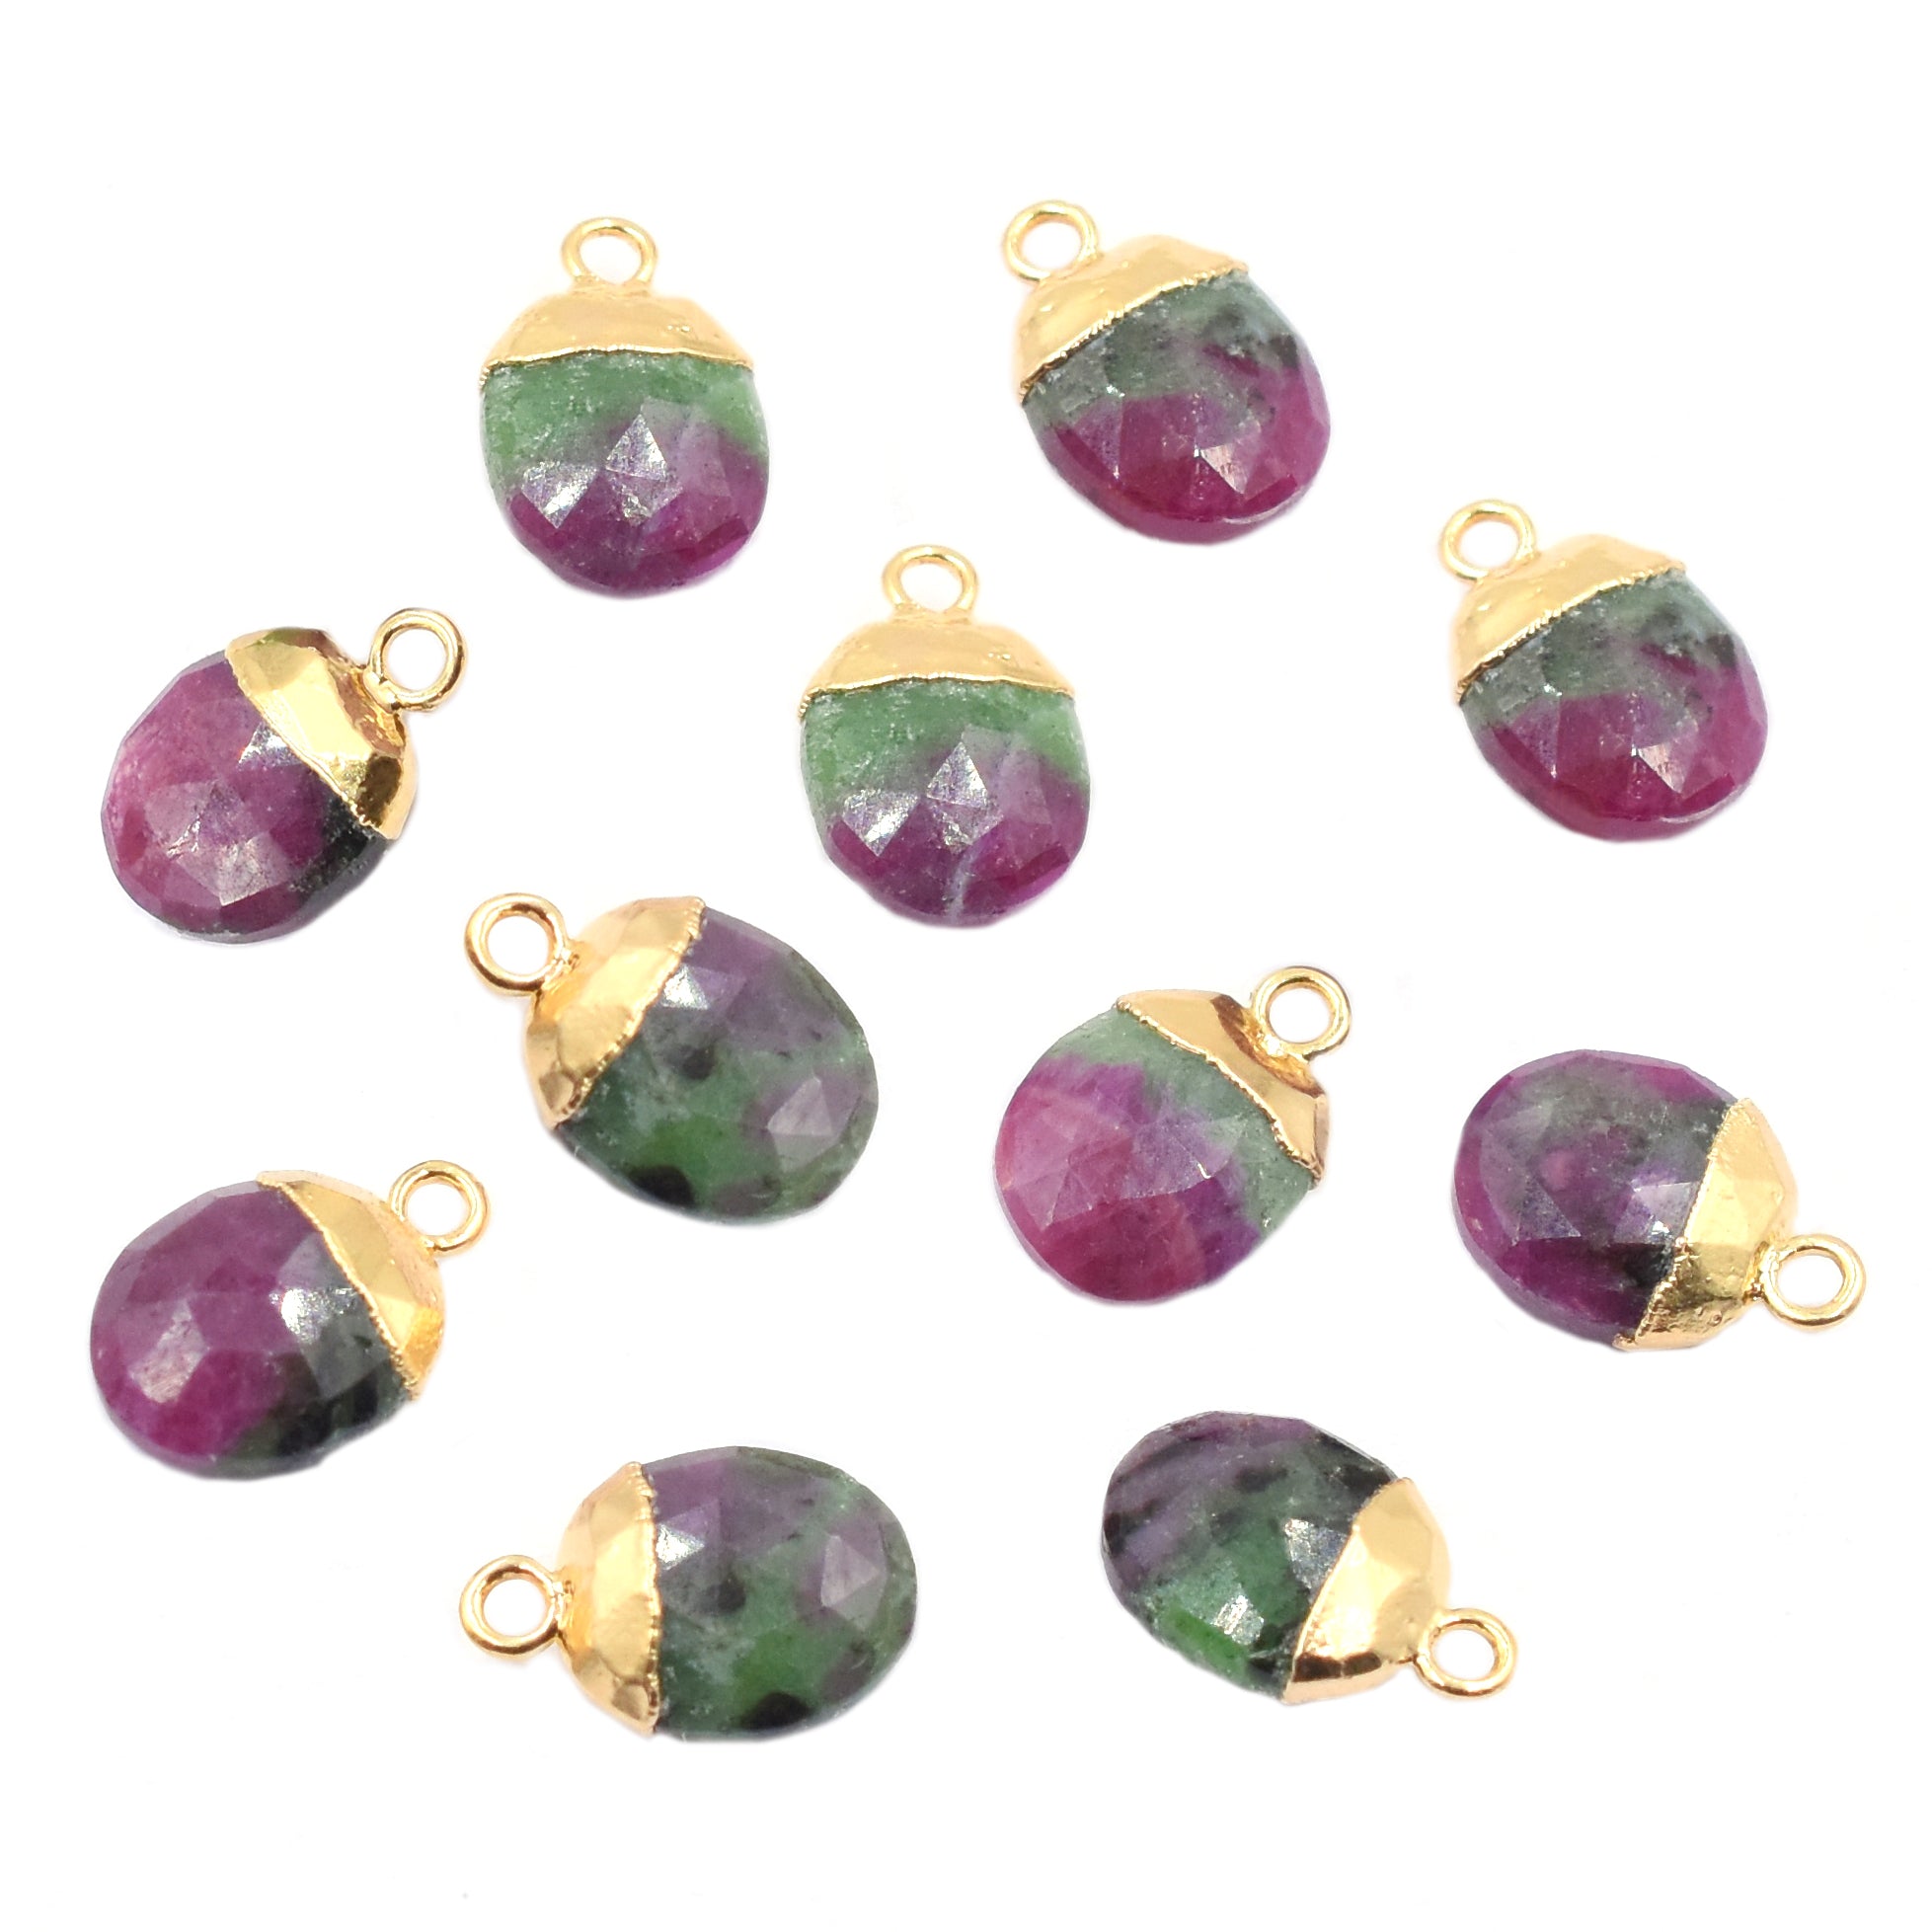 Ruby Zoisite 10X8 MM Oval Shape Gold Electroplated Pendant (Set Of 2 Pcs)